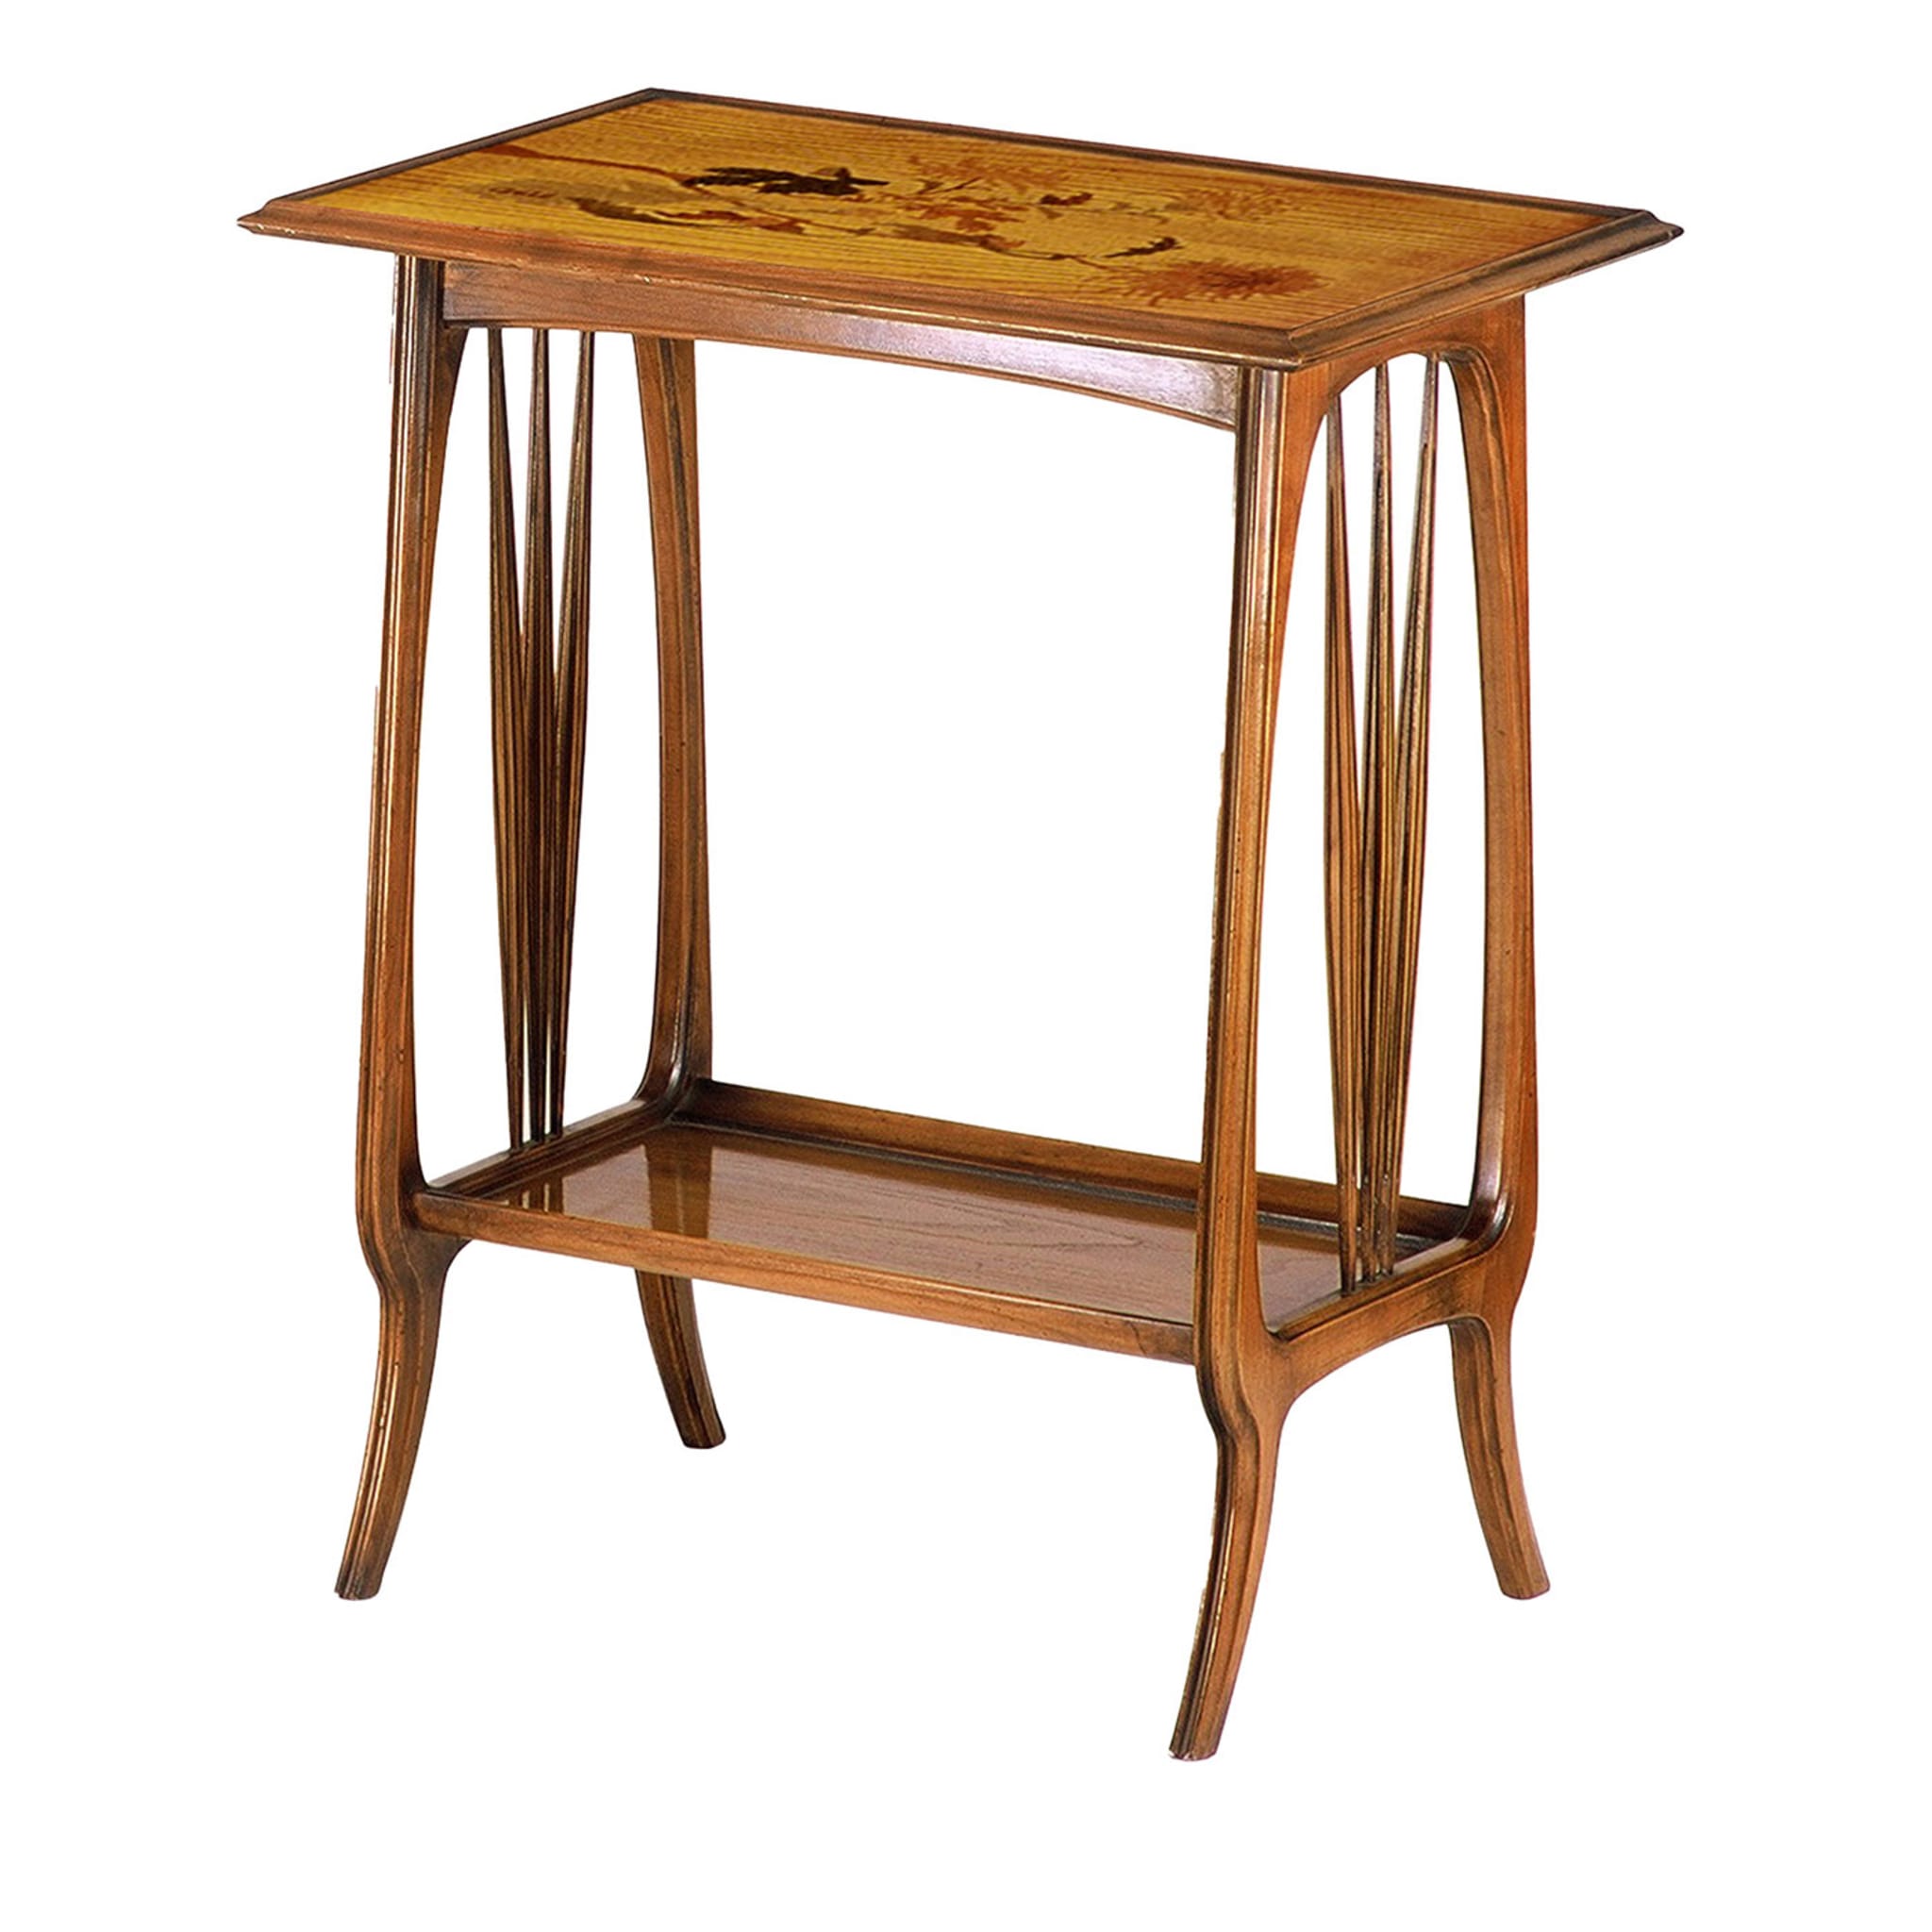 French Art Nouveau-Style Rectangular Side Table by Emile Gallè - Main view